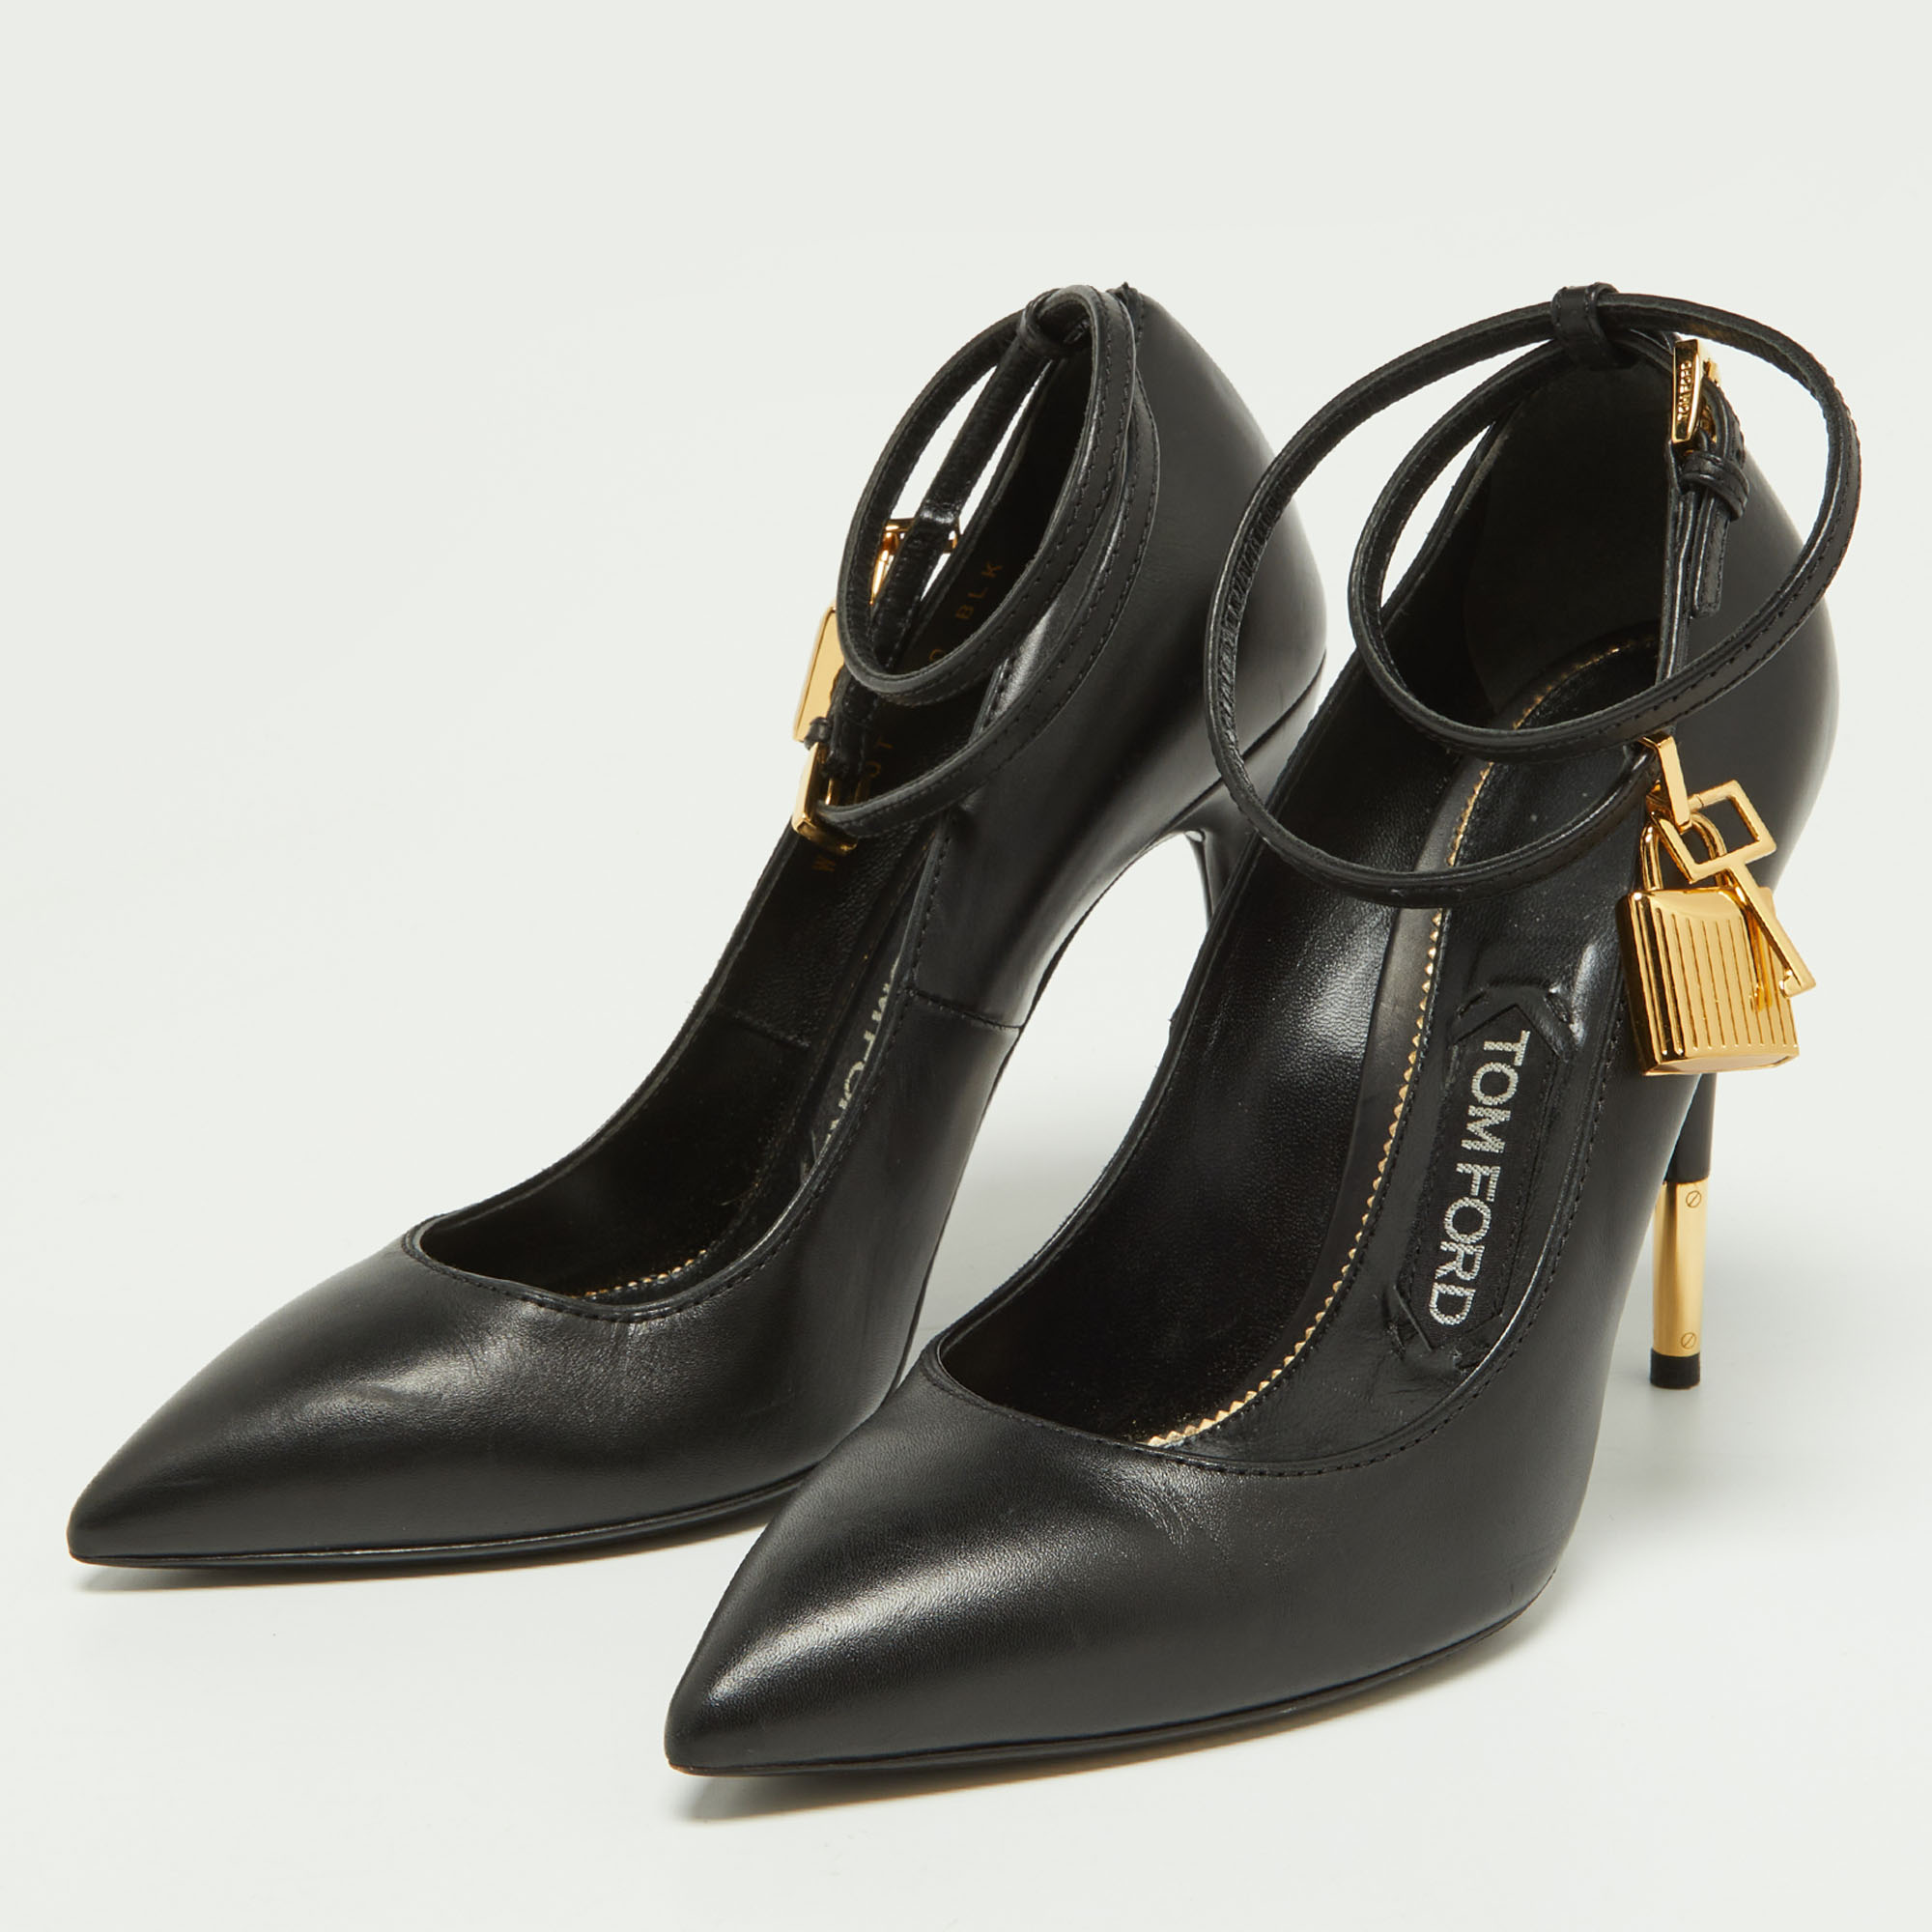 

Tom Ford Black Leather Padlock Ankle Wrap Pumps Size